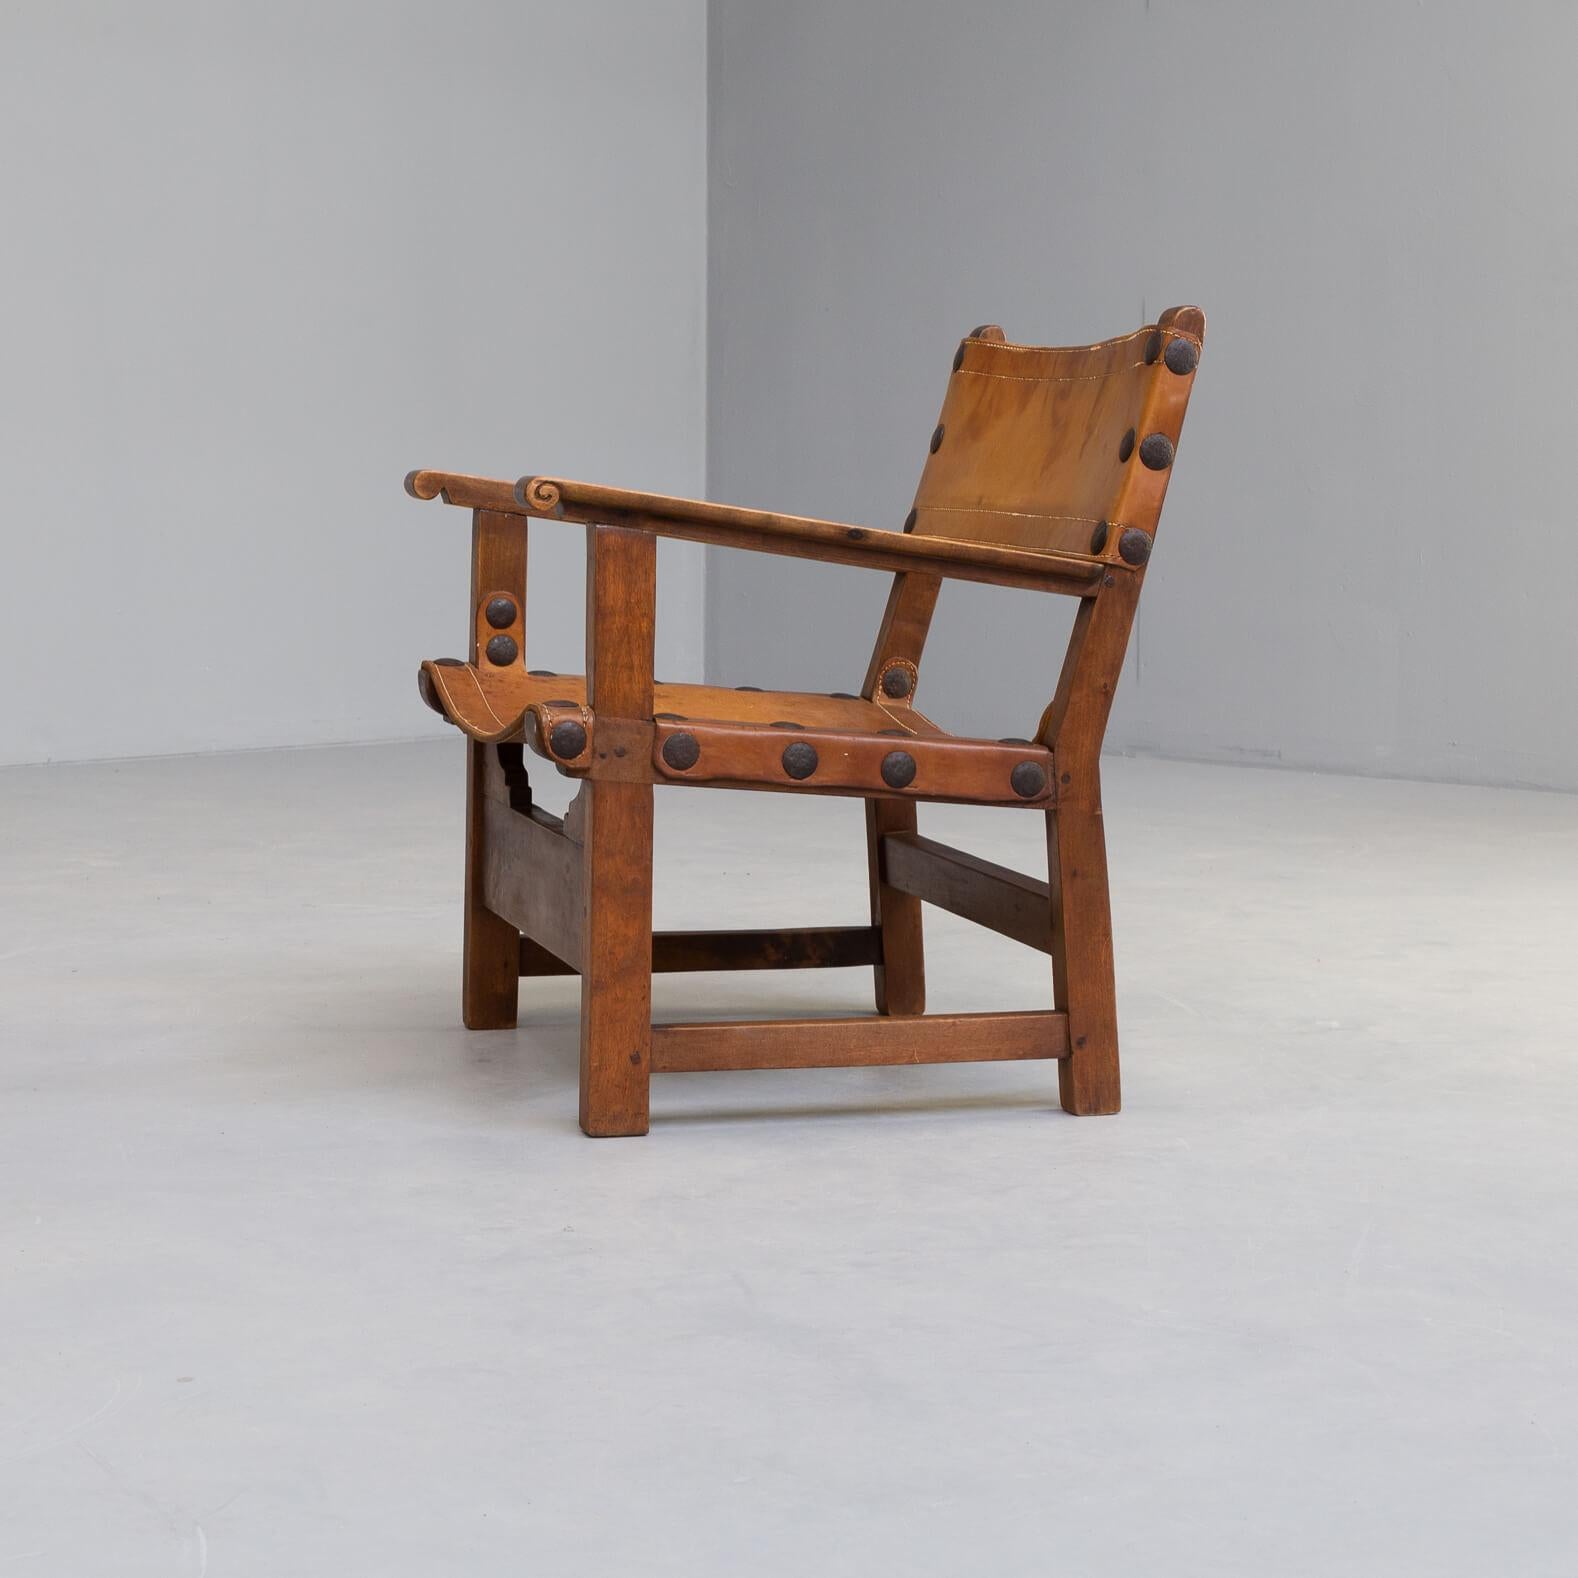 50s Oak Brutalist Spanish Chair with Saddle Leather For Sale 4